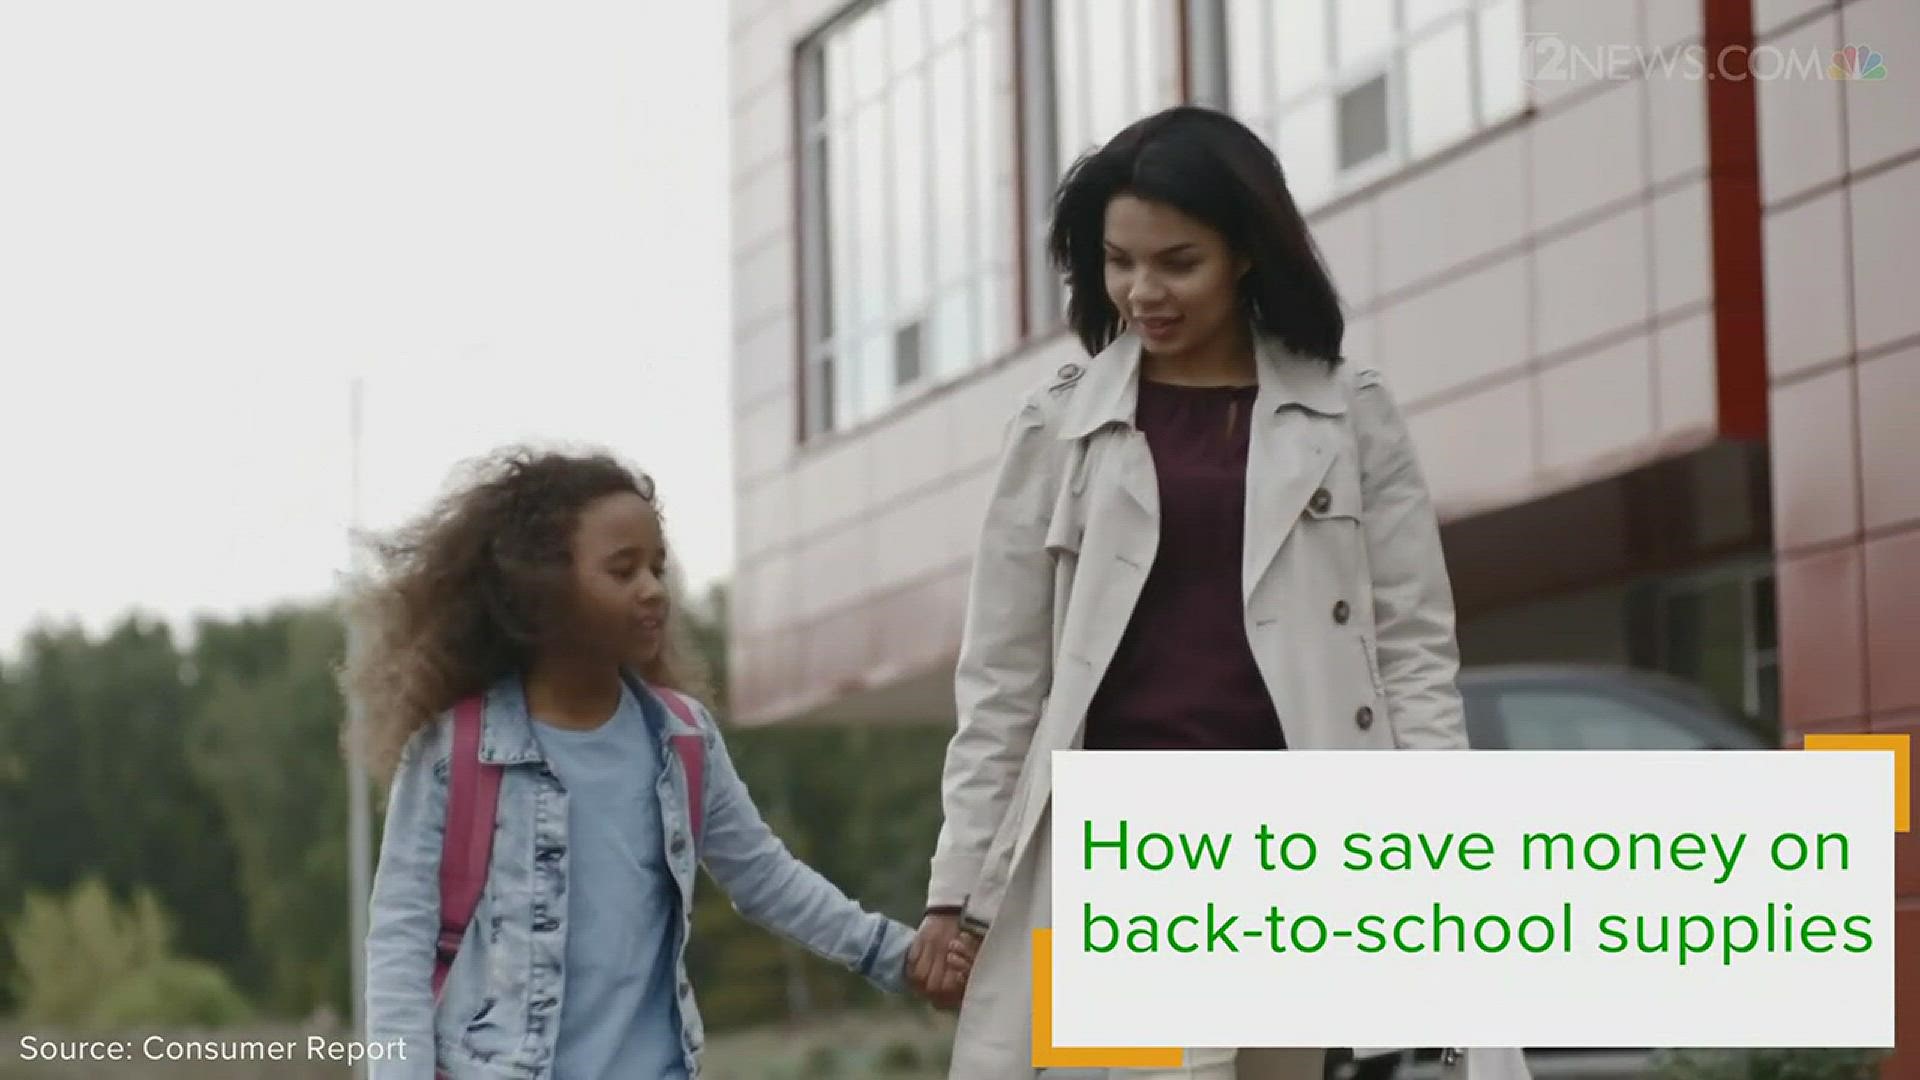 Here's how to save money on back-to-school supplies this year.